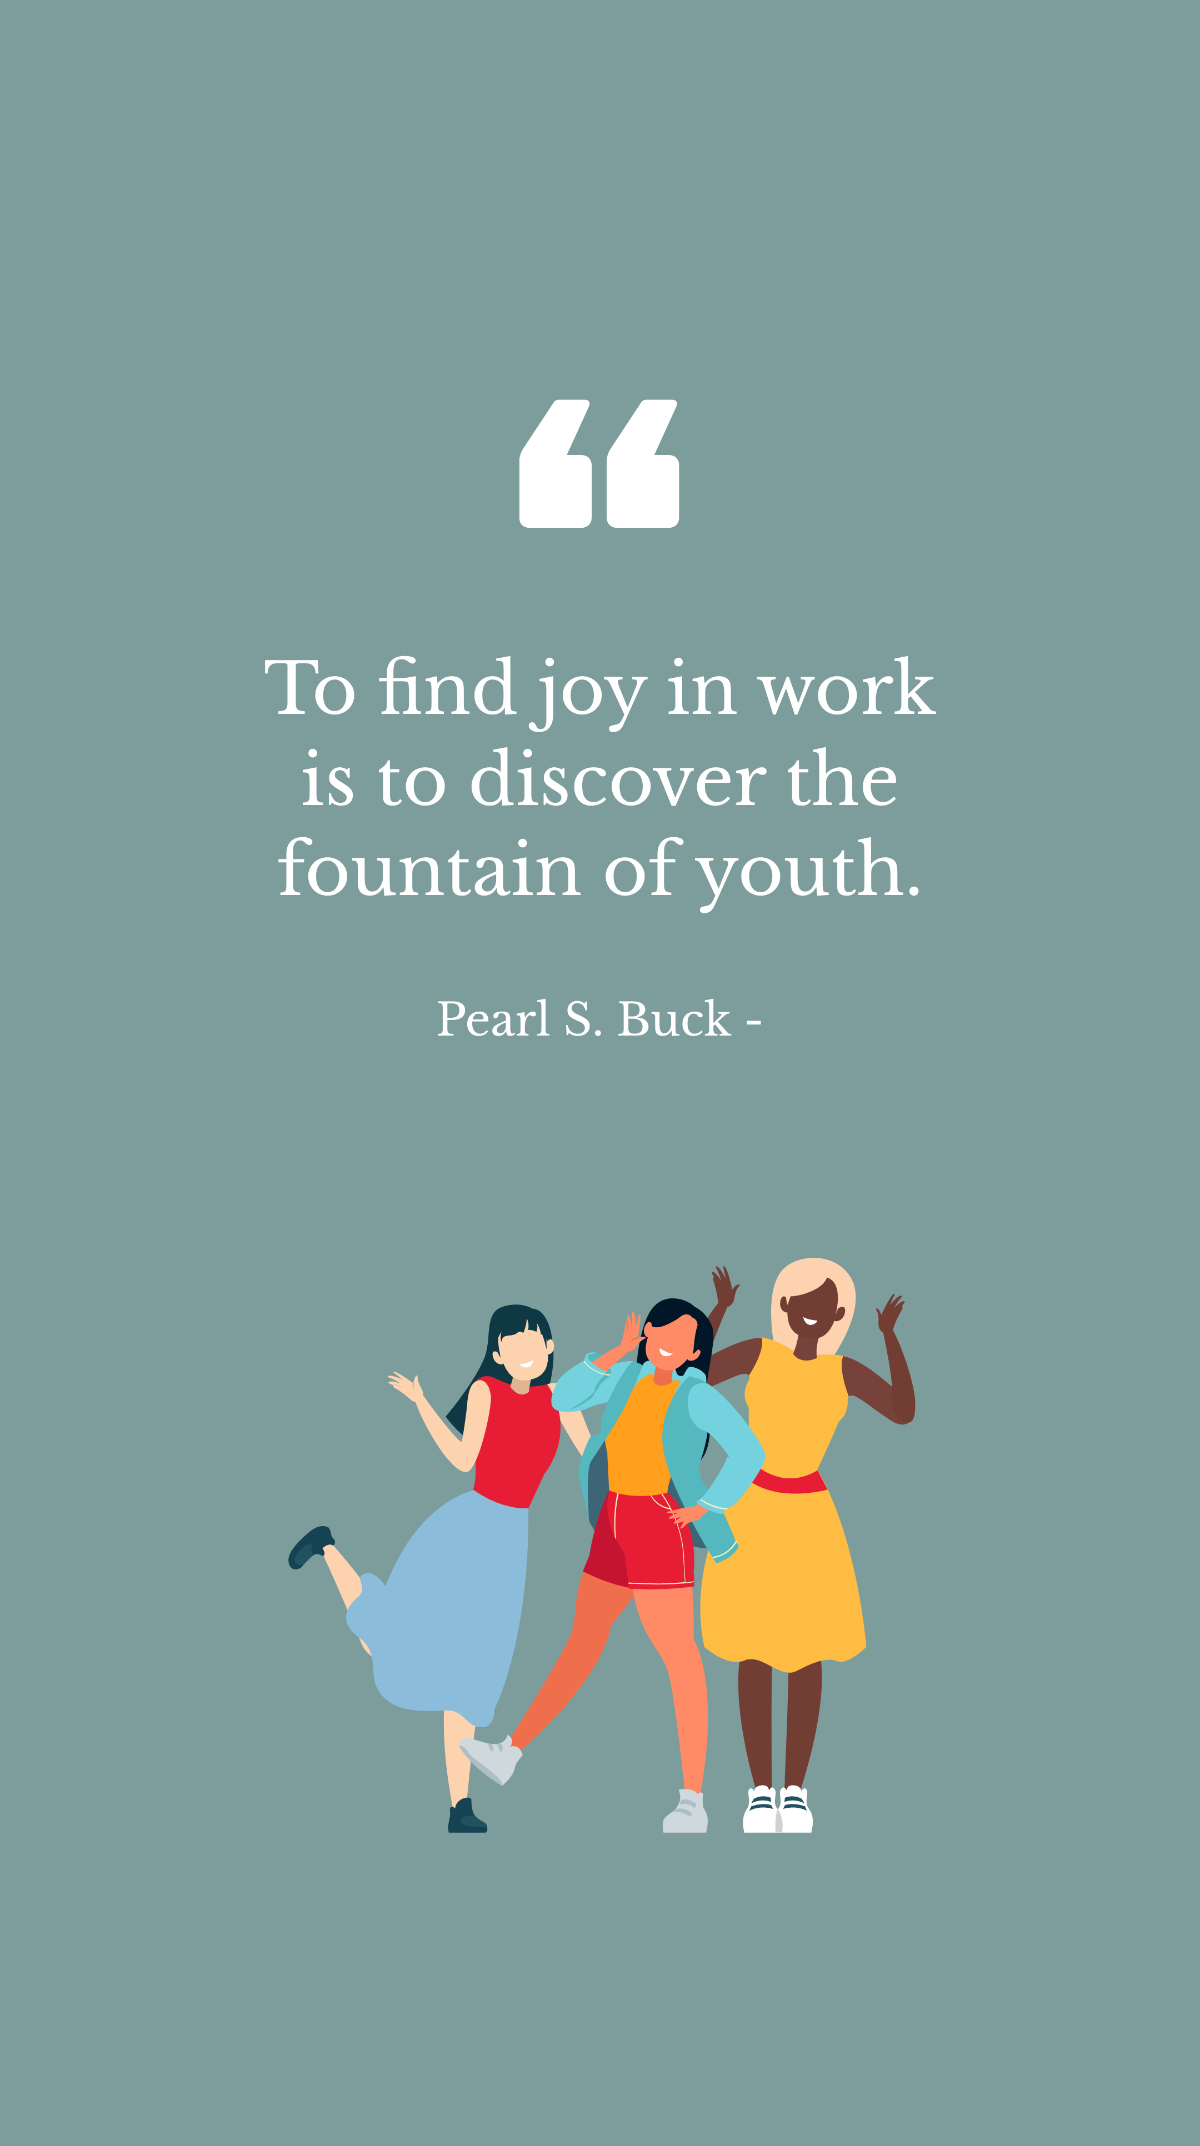 Pearl S. Buck - To find joy in work is to discover the fountain of youth.